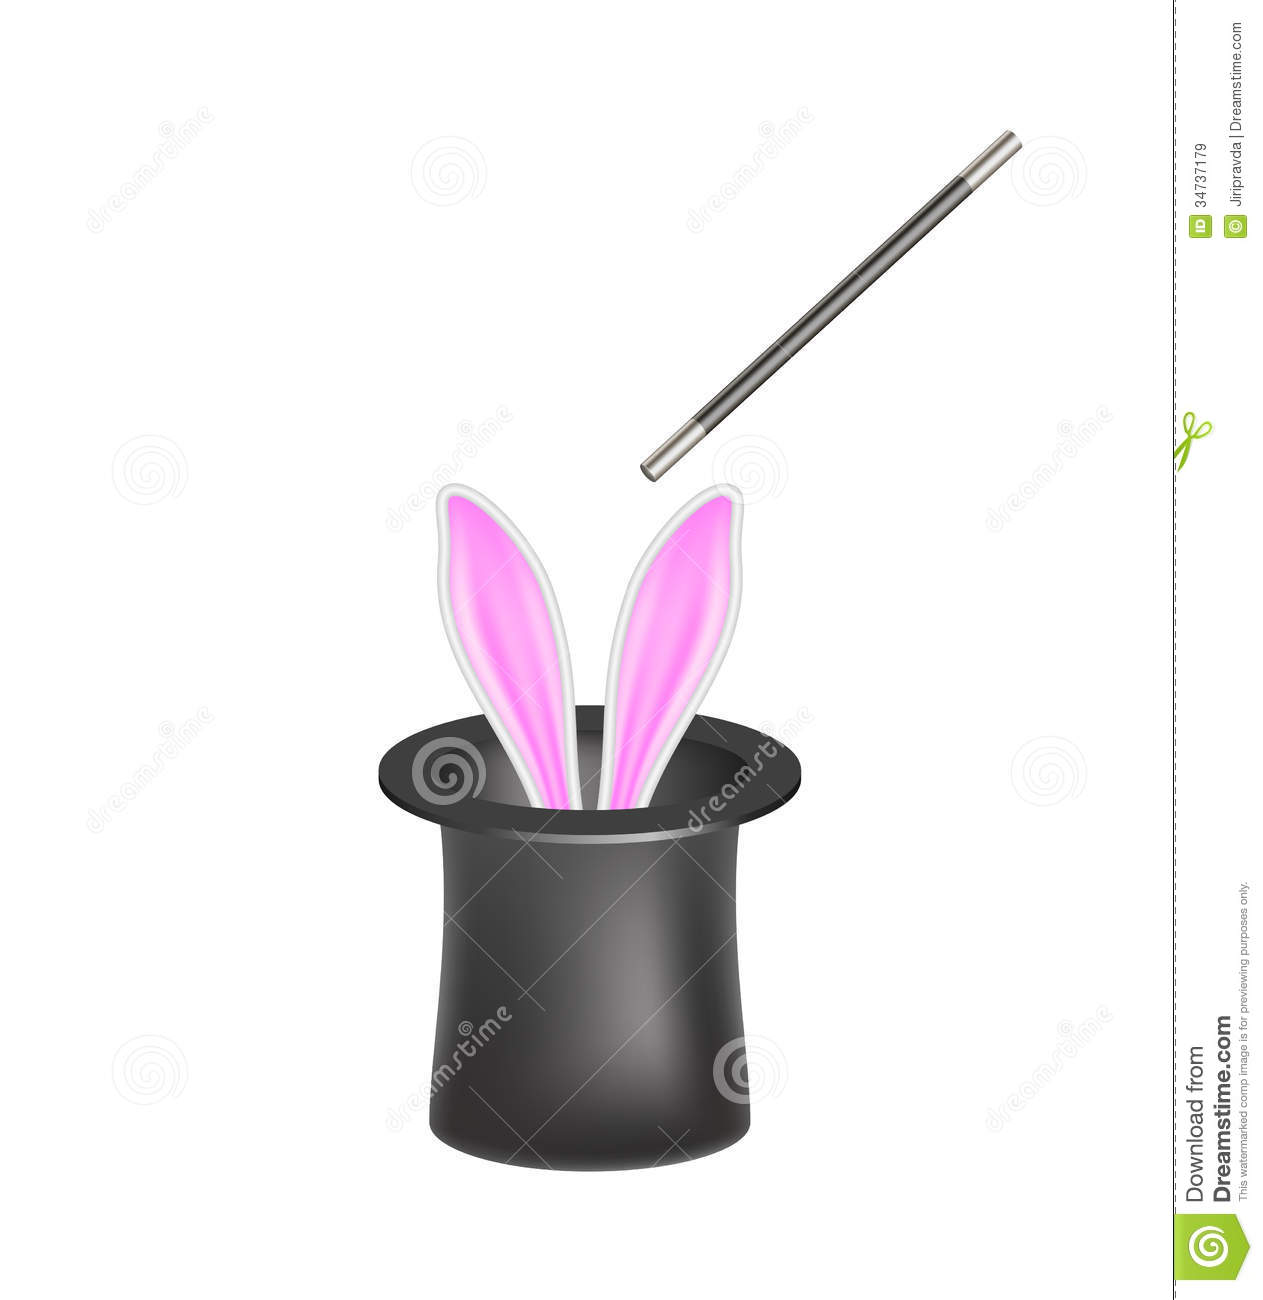 Magic Hat Clipart Magic Hat With Rabbit Ears And